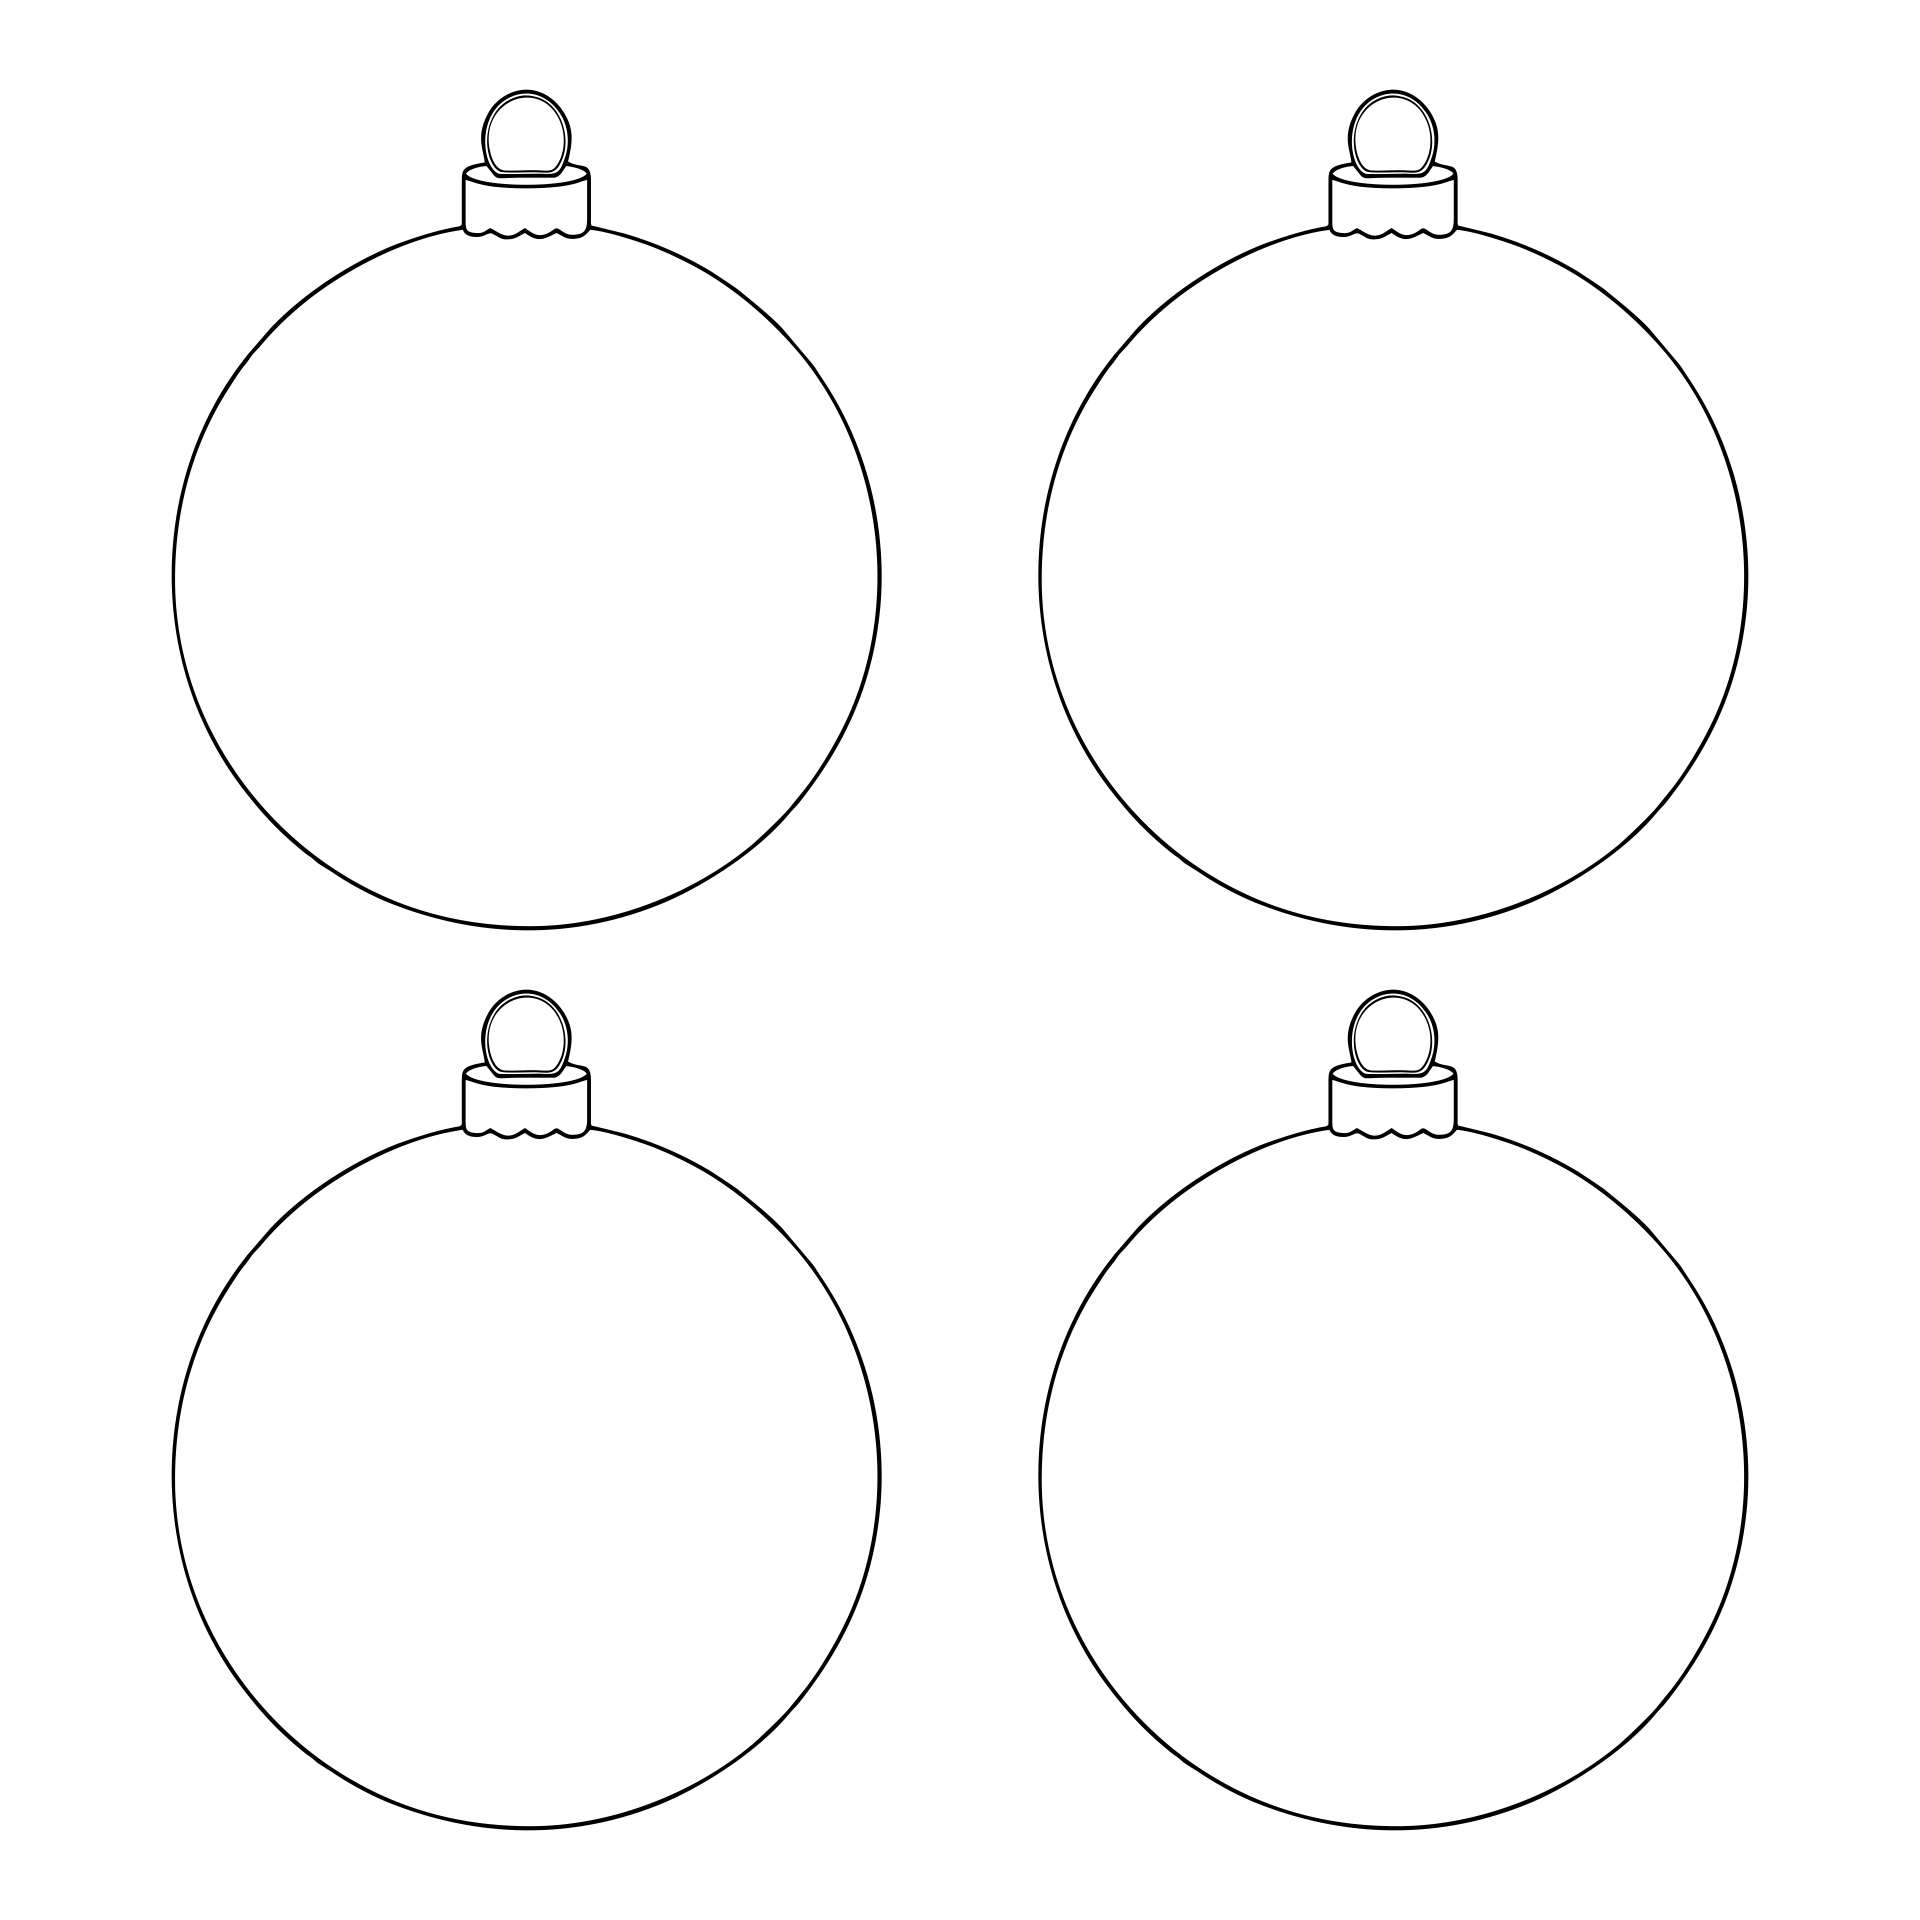 15 Best Free Printable Christmas Ornament Shapes PDF for Free at Printablee